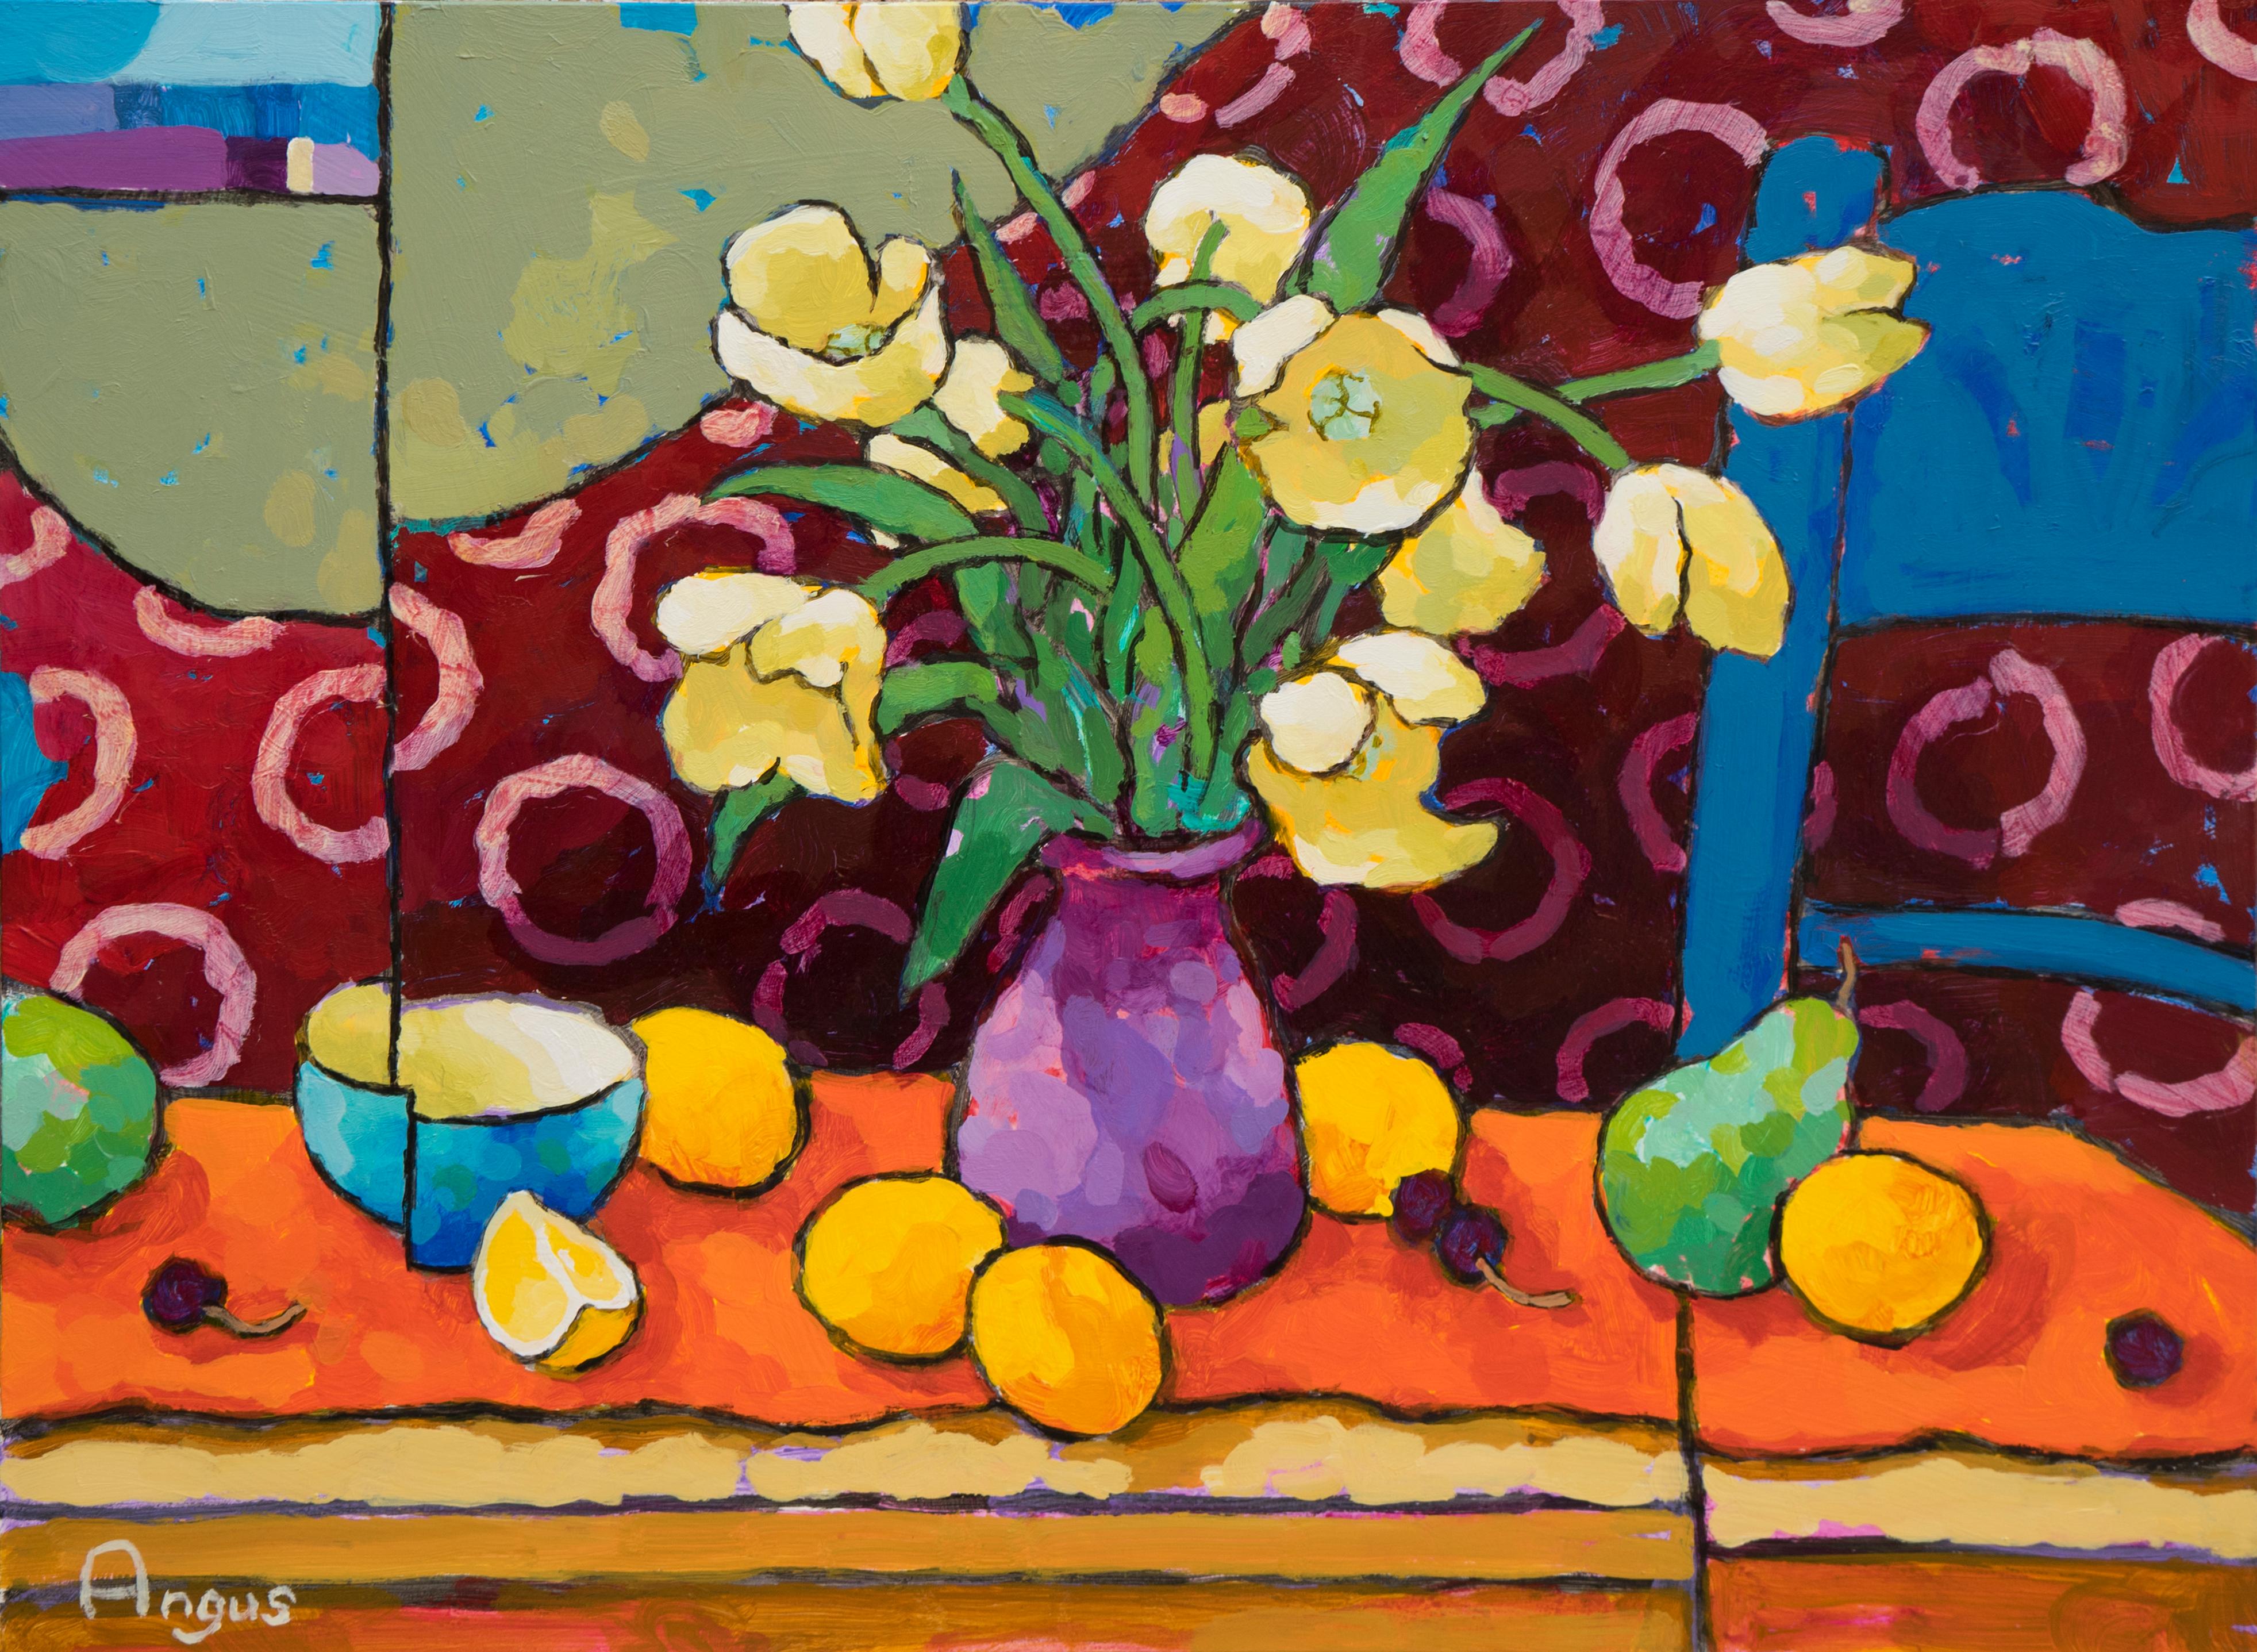 Tulips over Red & Orange with Blue Chair (still life, fruit, yellow tulips) - Painting by Angus Wilson